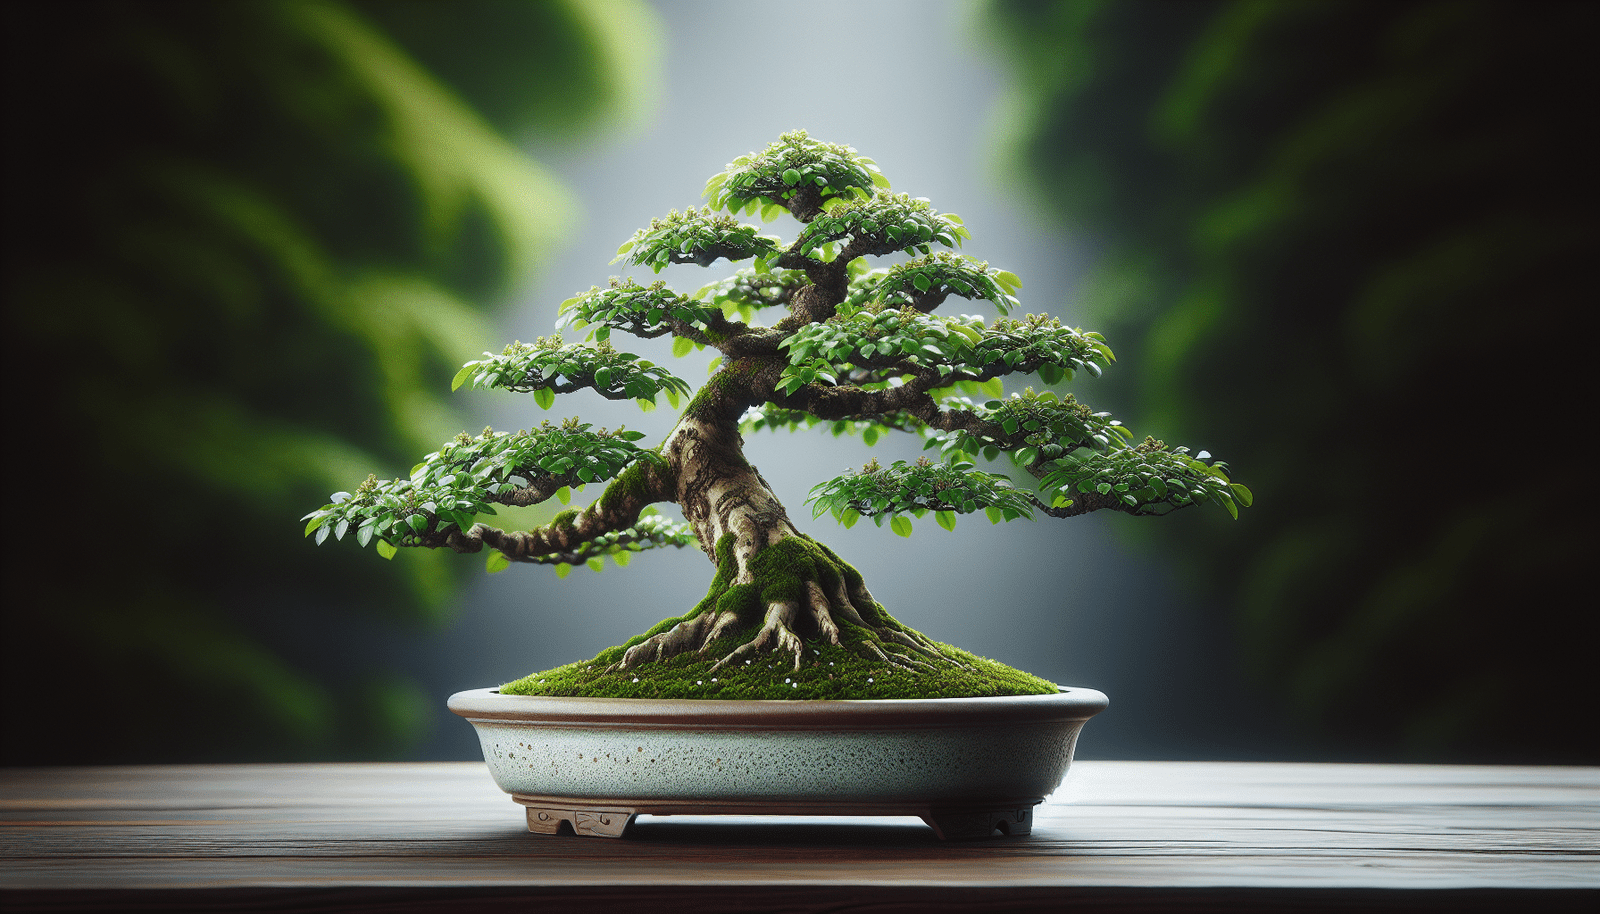 Are Bonsai Trees Real?